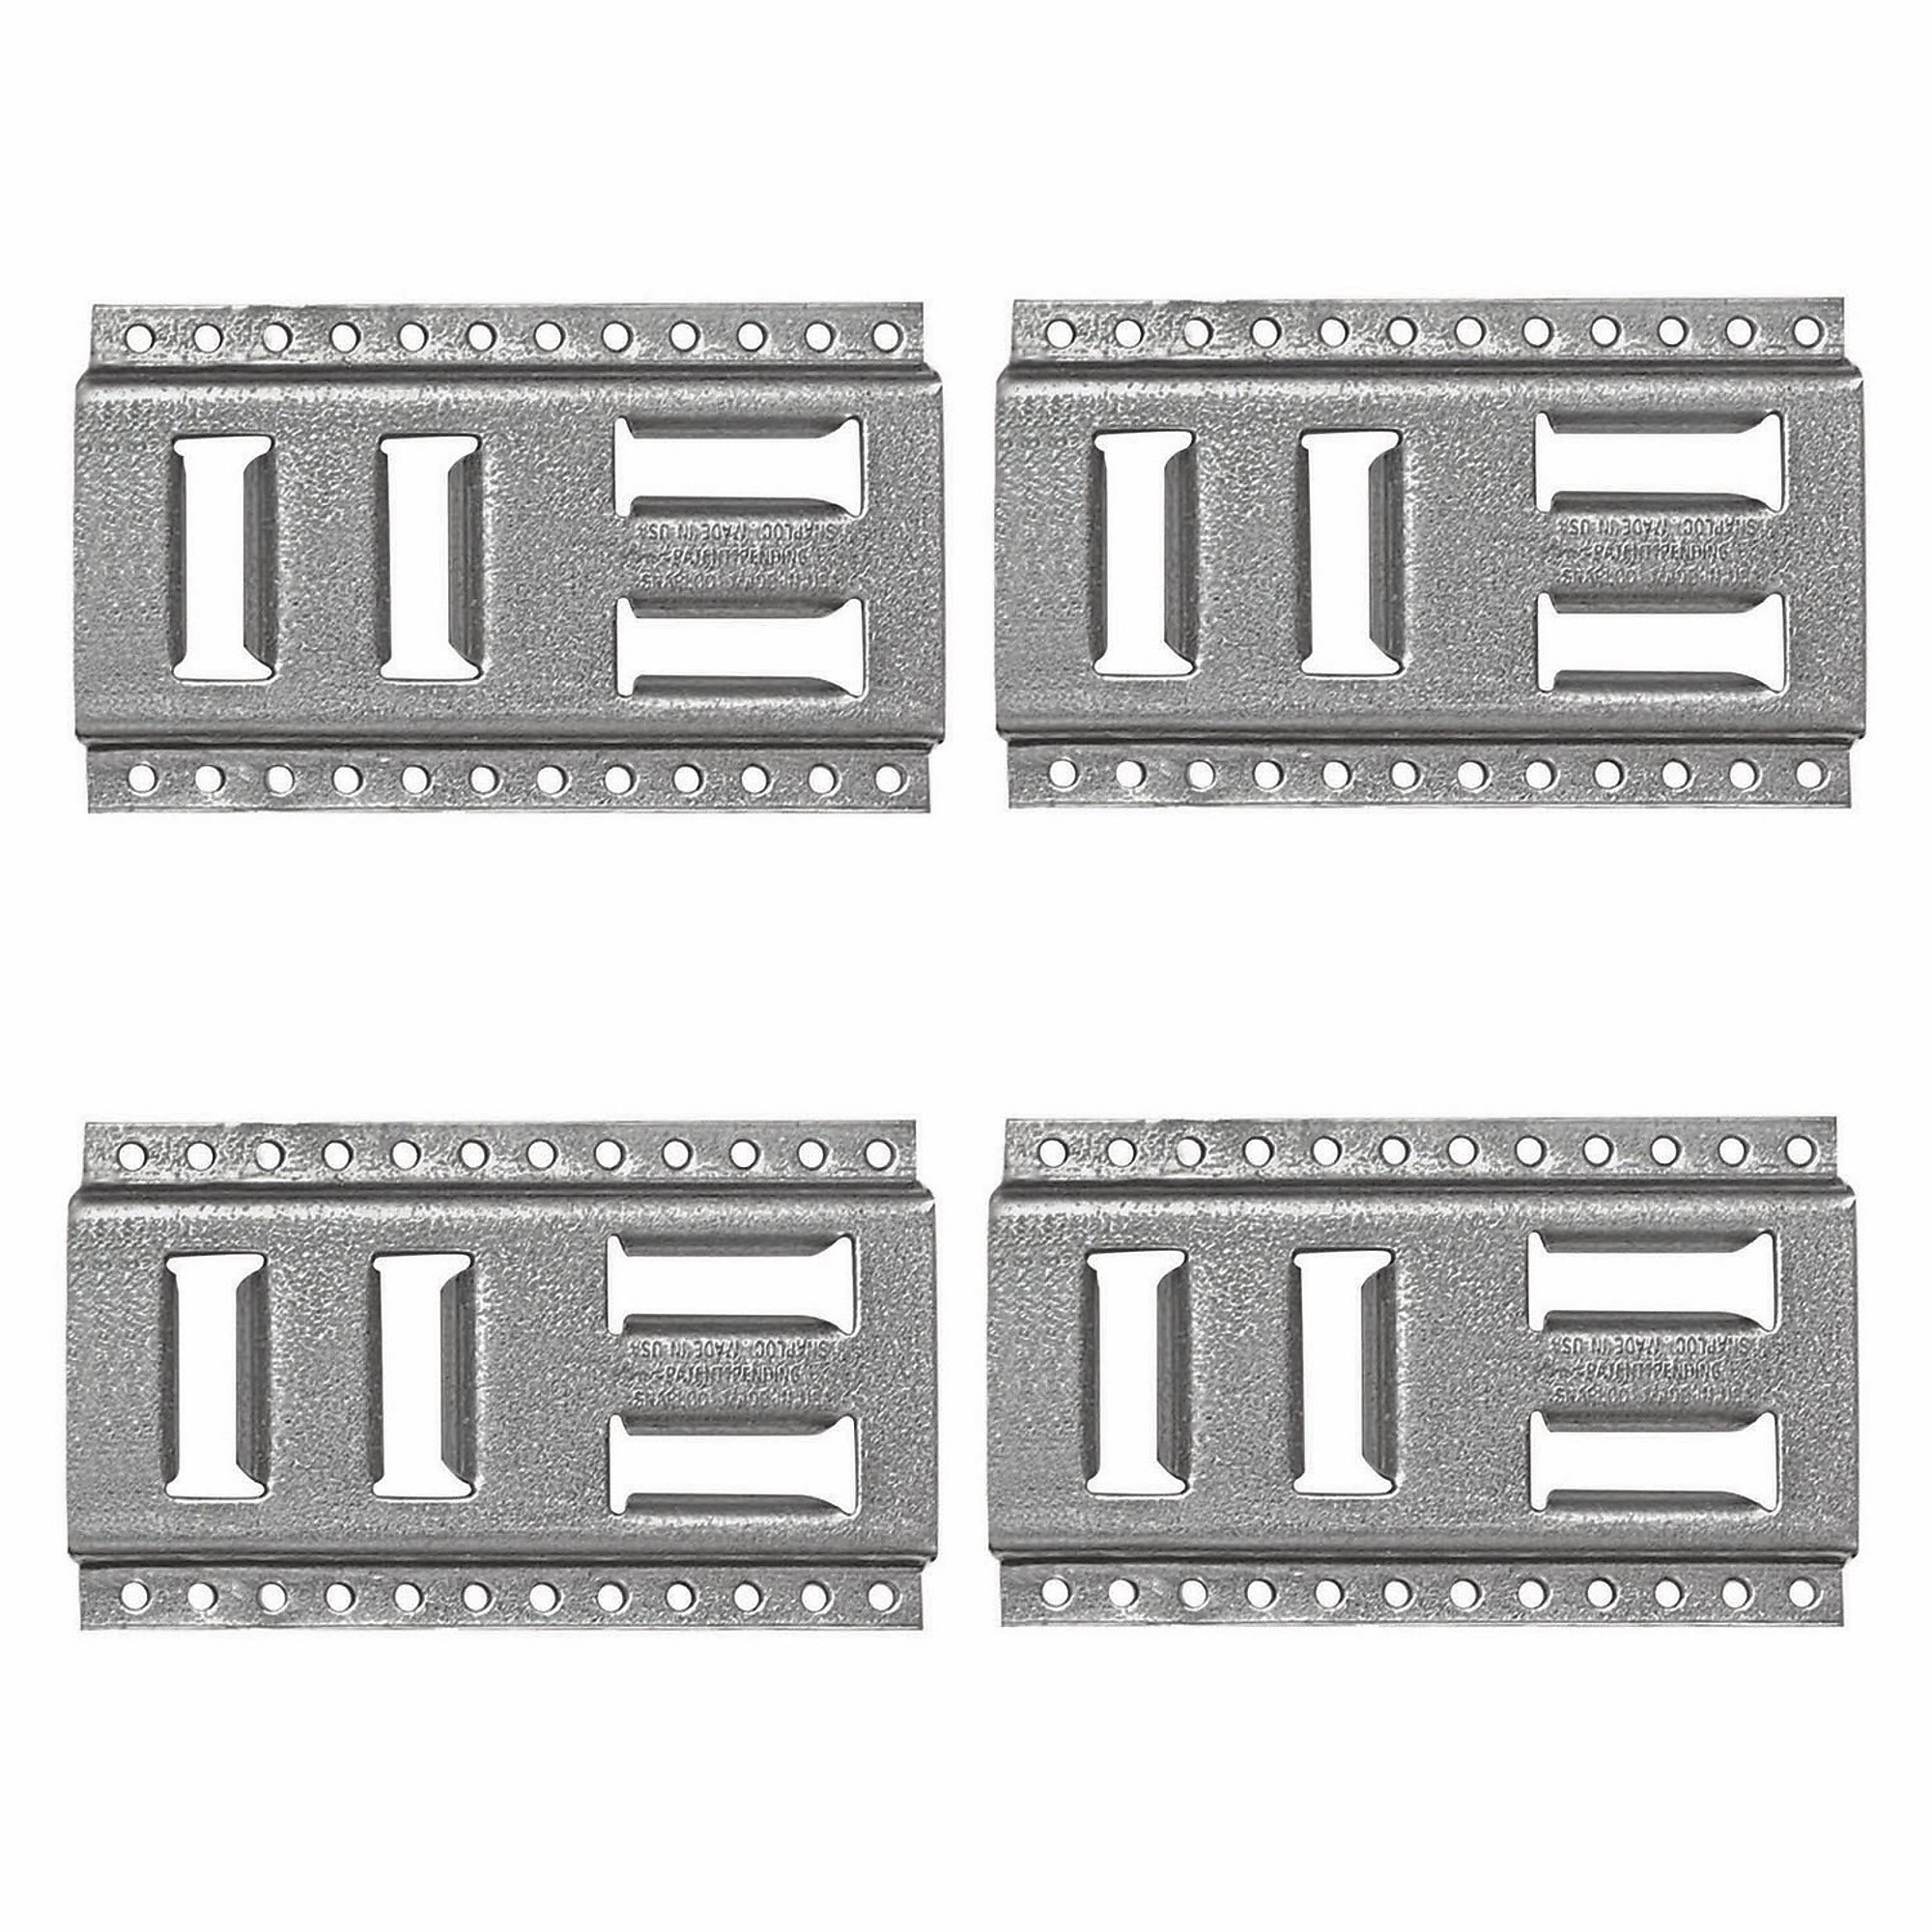 Snap-Loc Cargo Control, Fast-Track E-Track 8Inch 4-Pack, Pieces (qty.) 4, Working Load 1000 lb, Material Galvanized Steel, Model SLAET08G4